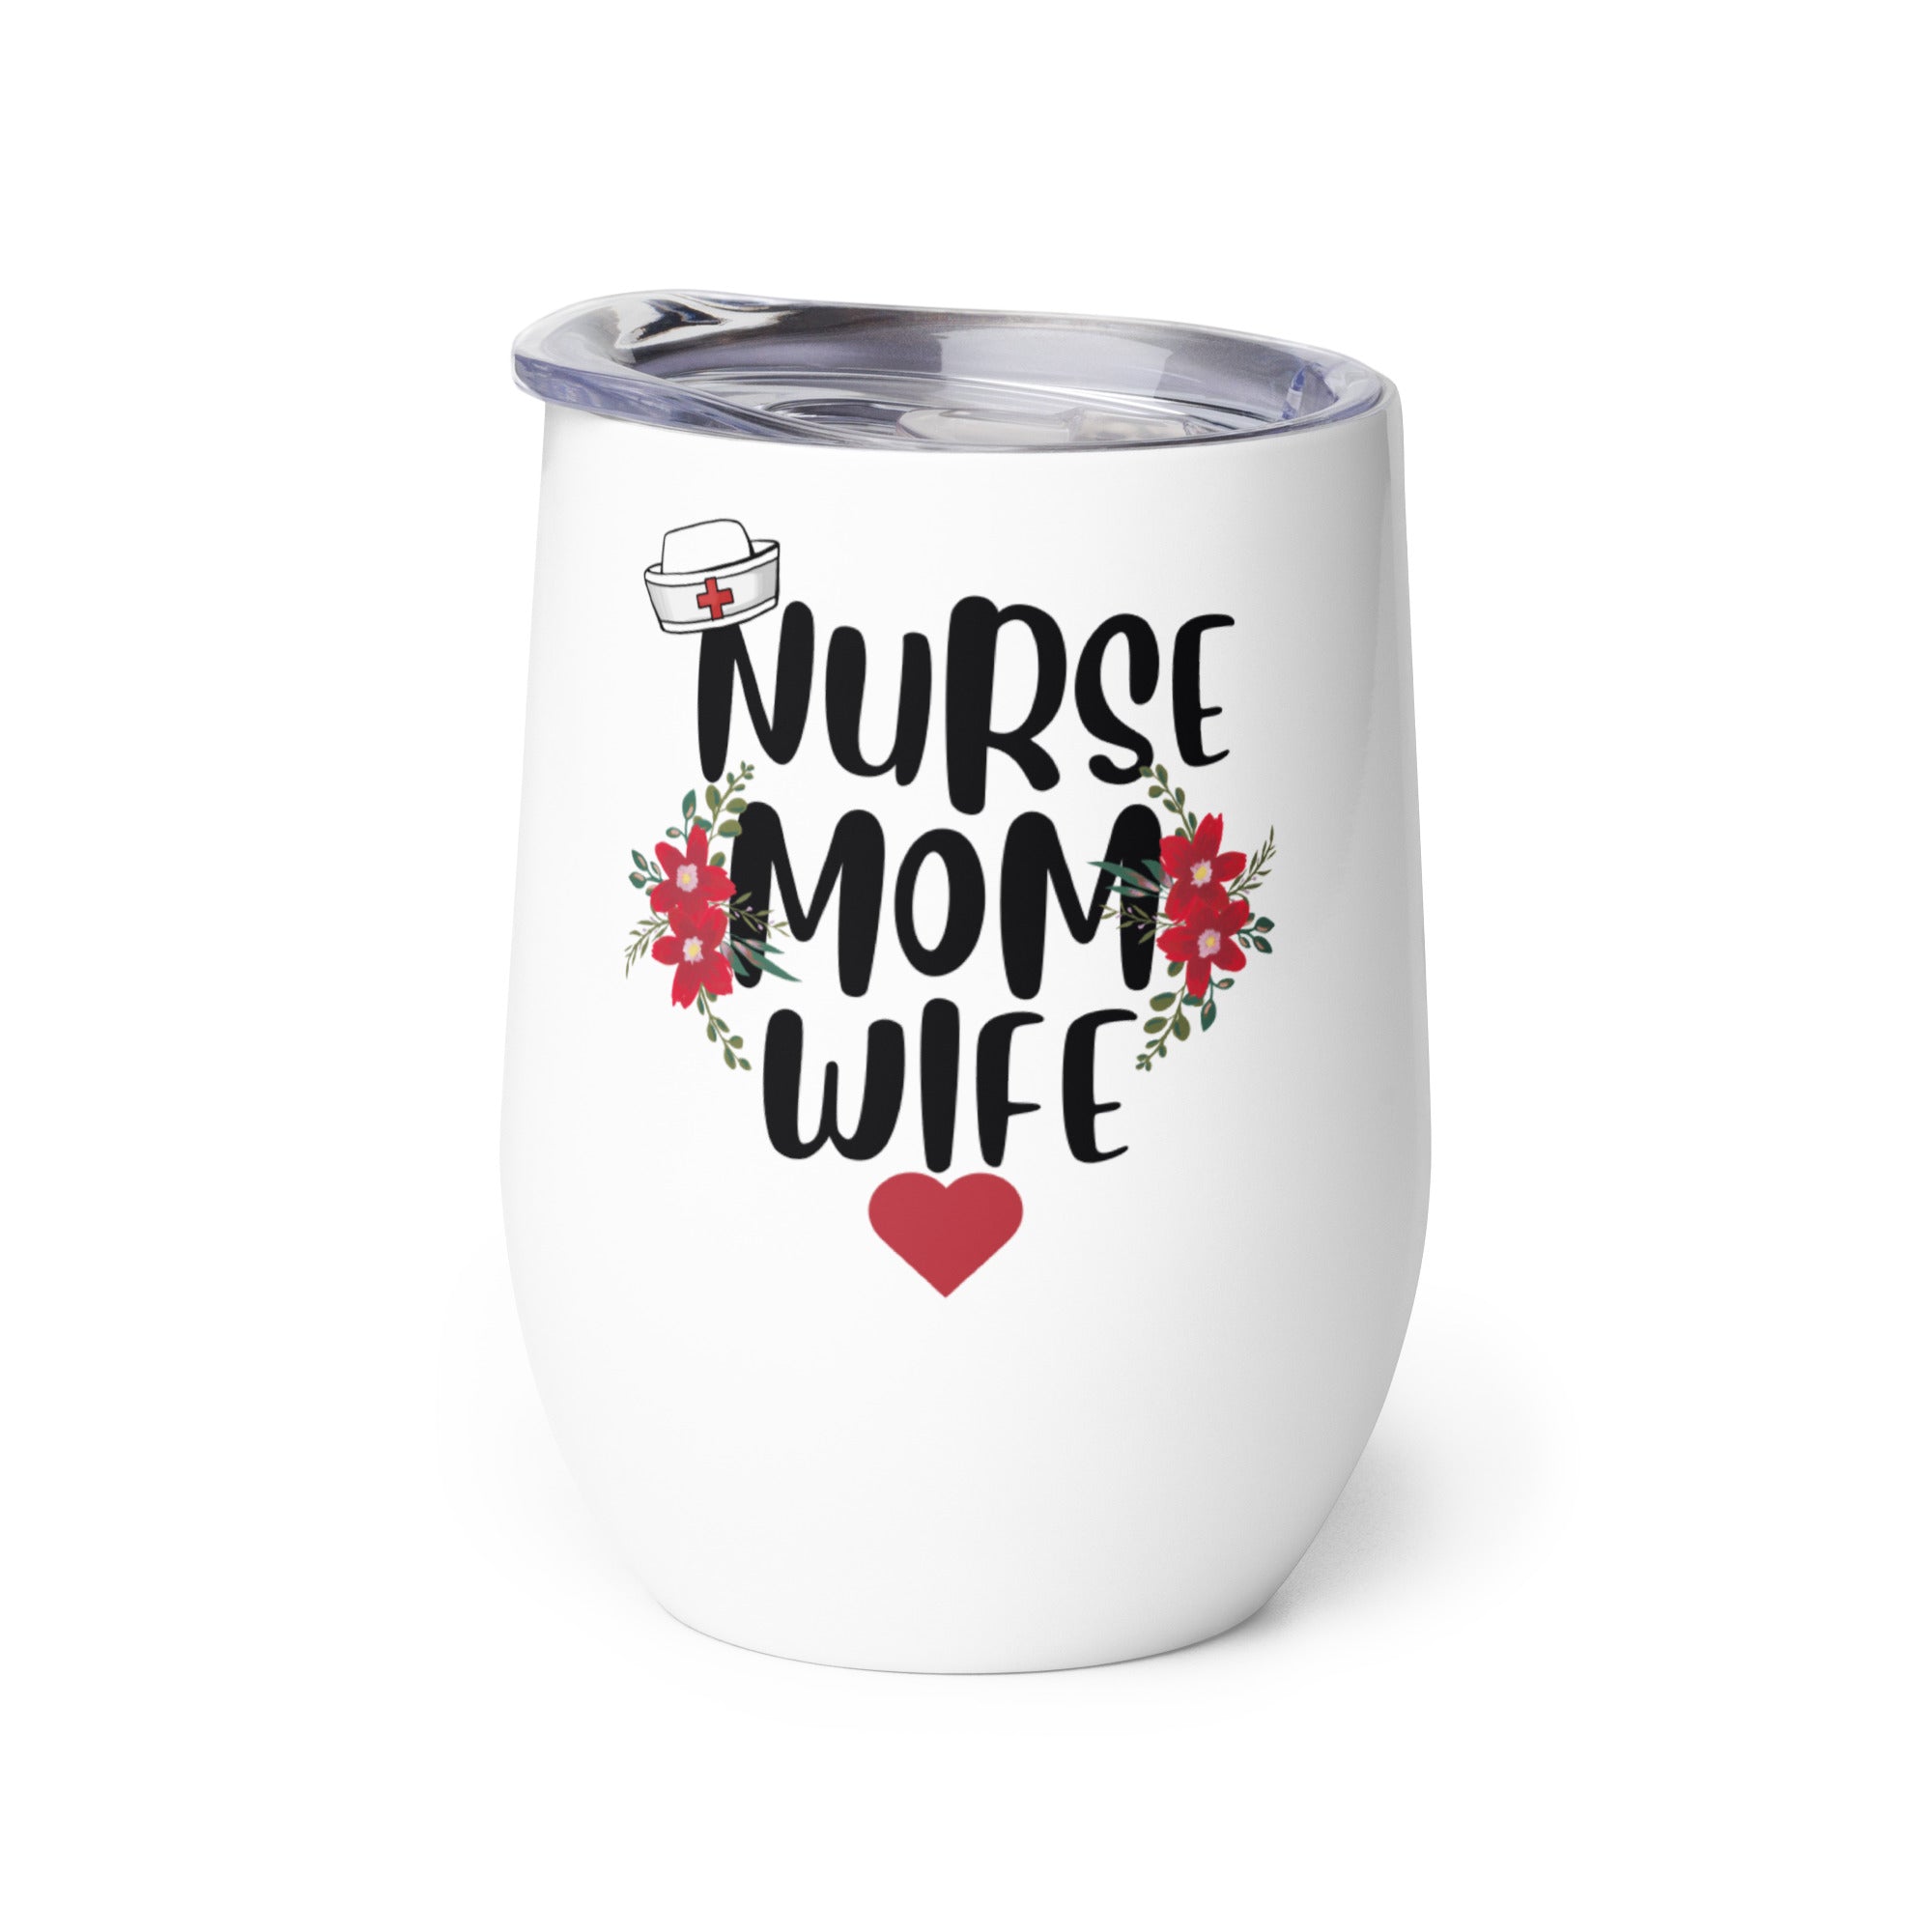 Nurse.Mom.Wife Wine Tumbler: Celebrate Your Multifaceted Journey!